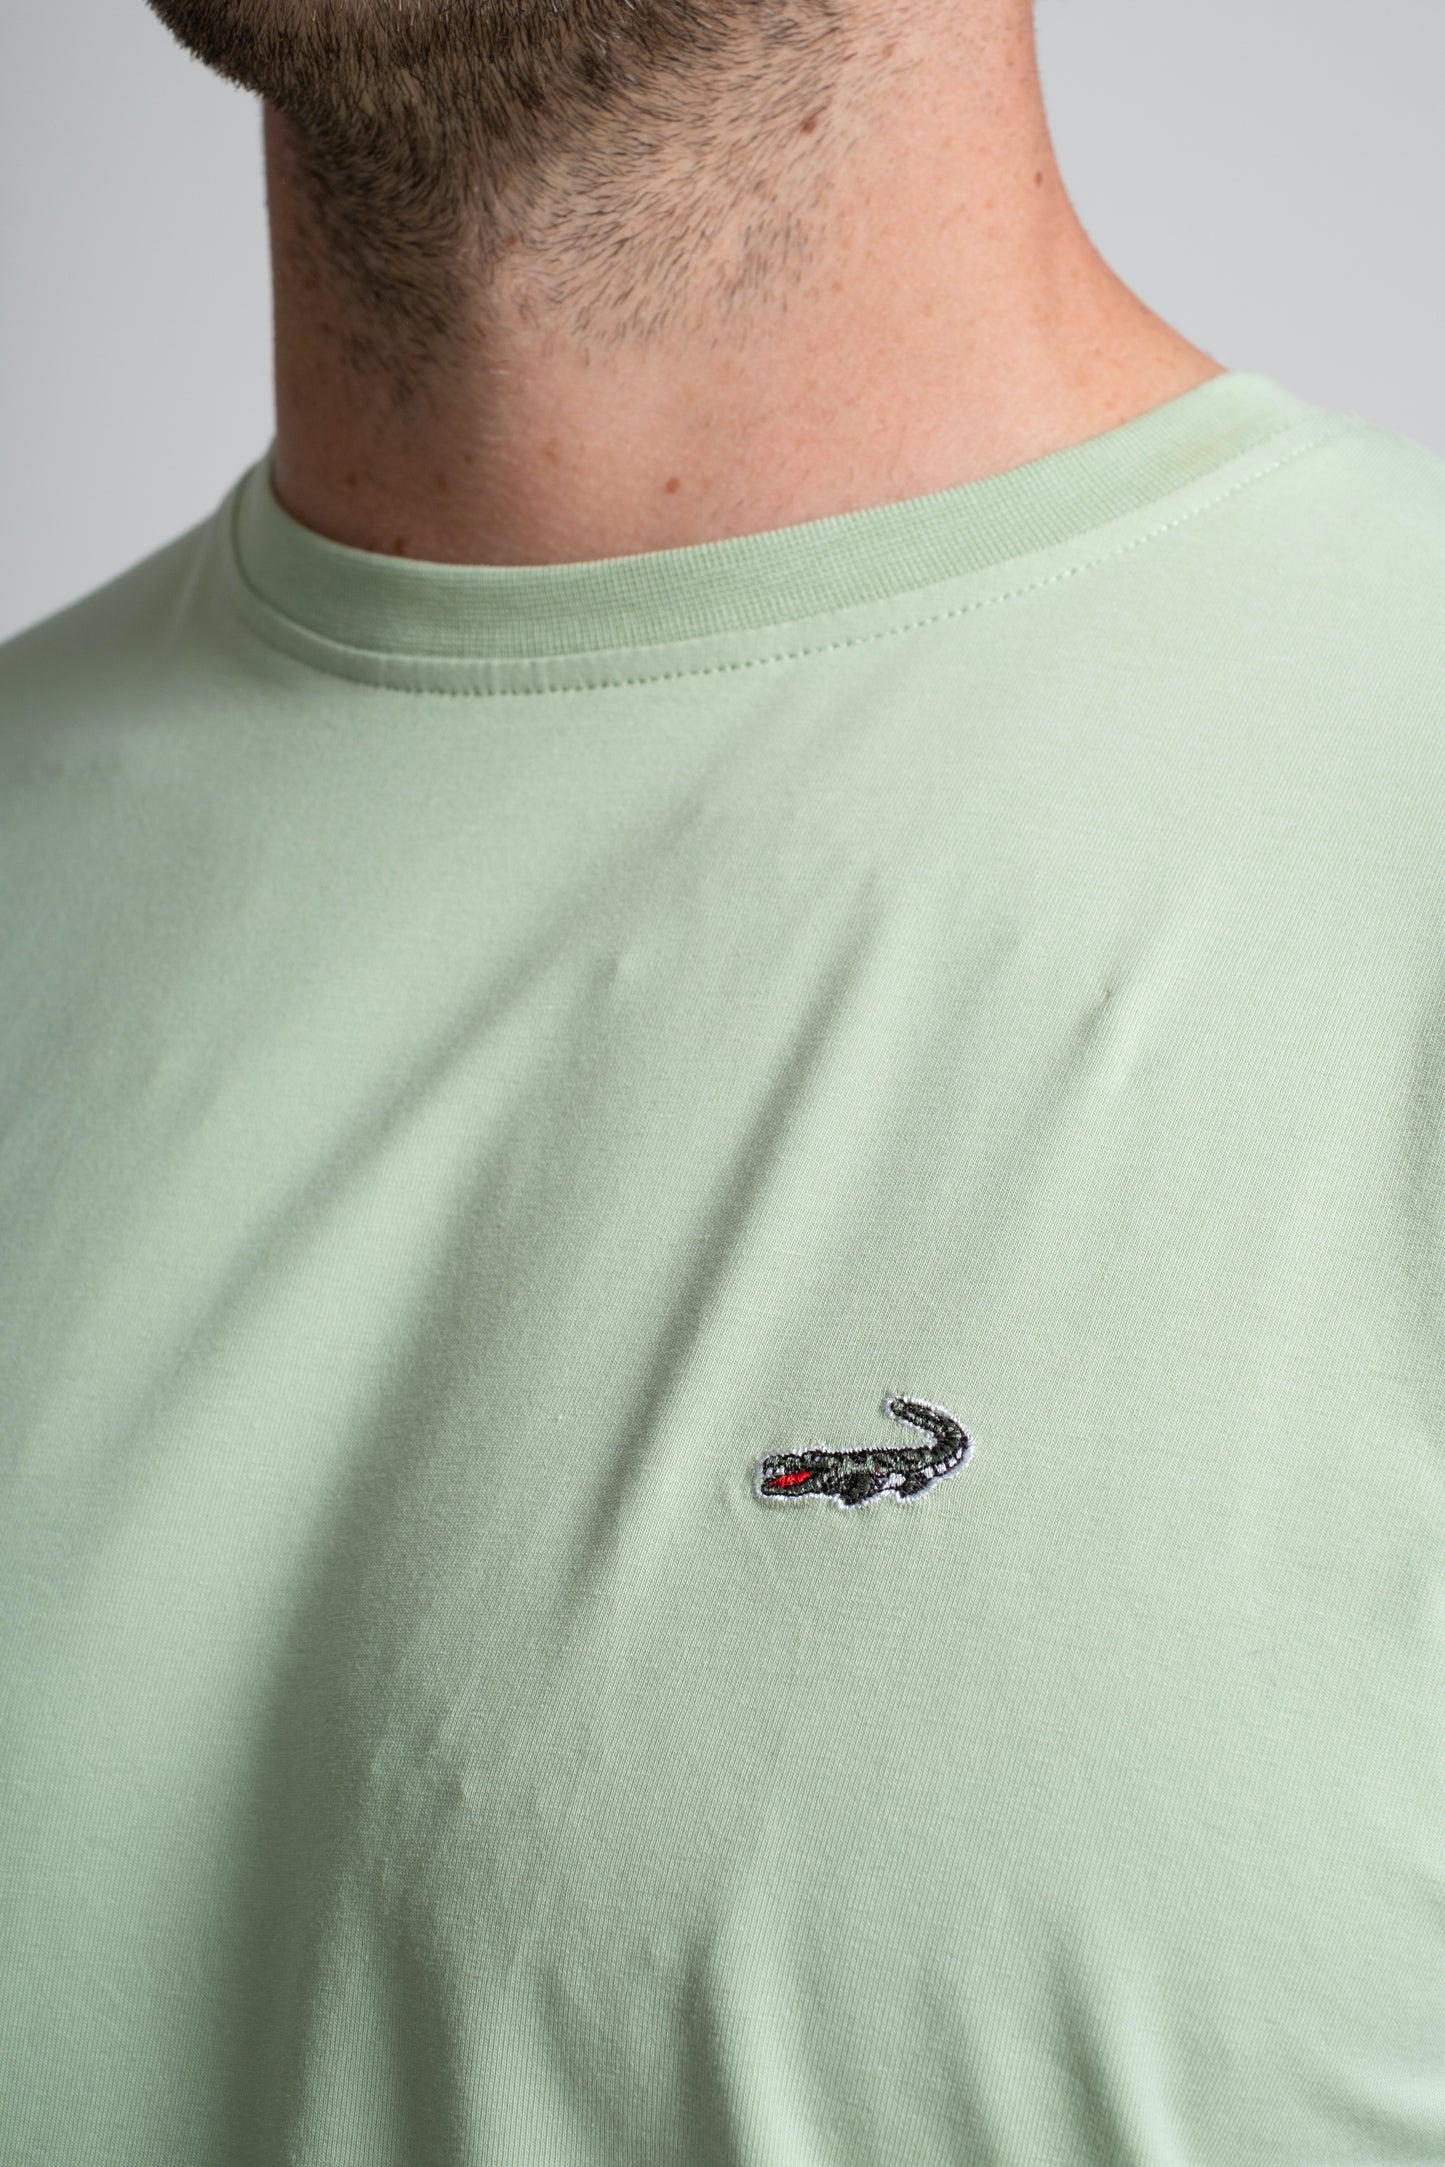 Classic Fit Short sleeves-CasualCrew Neck - Green Meadow